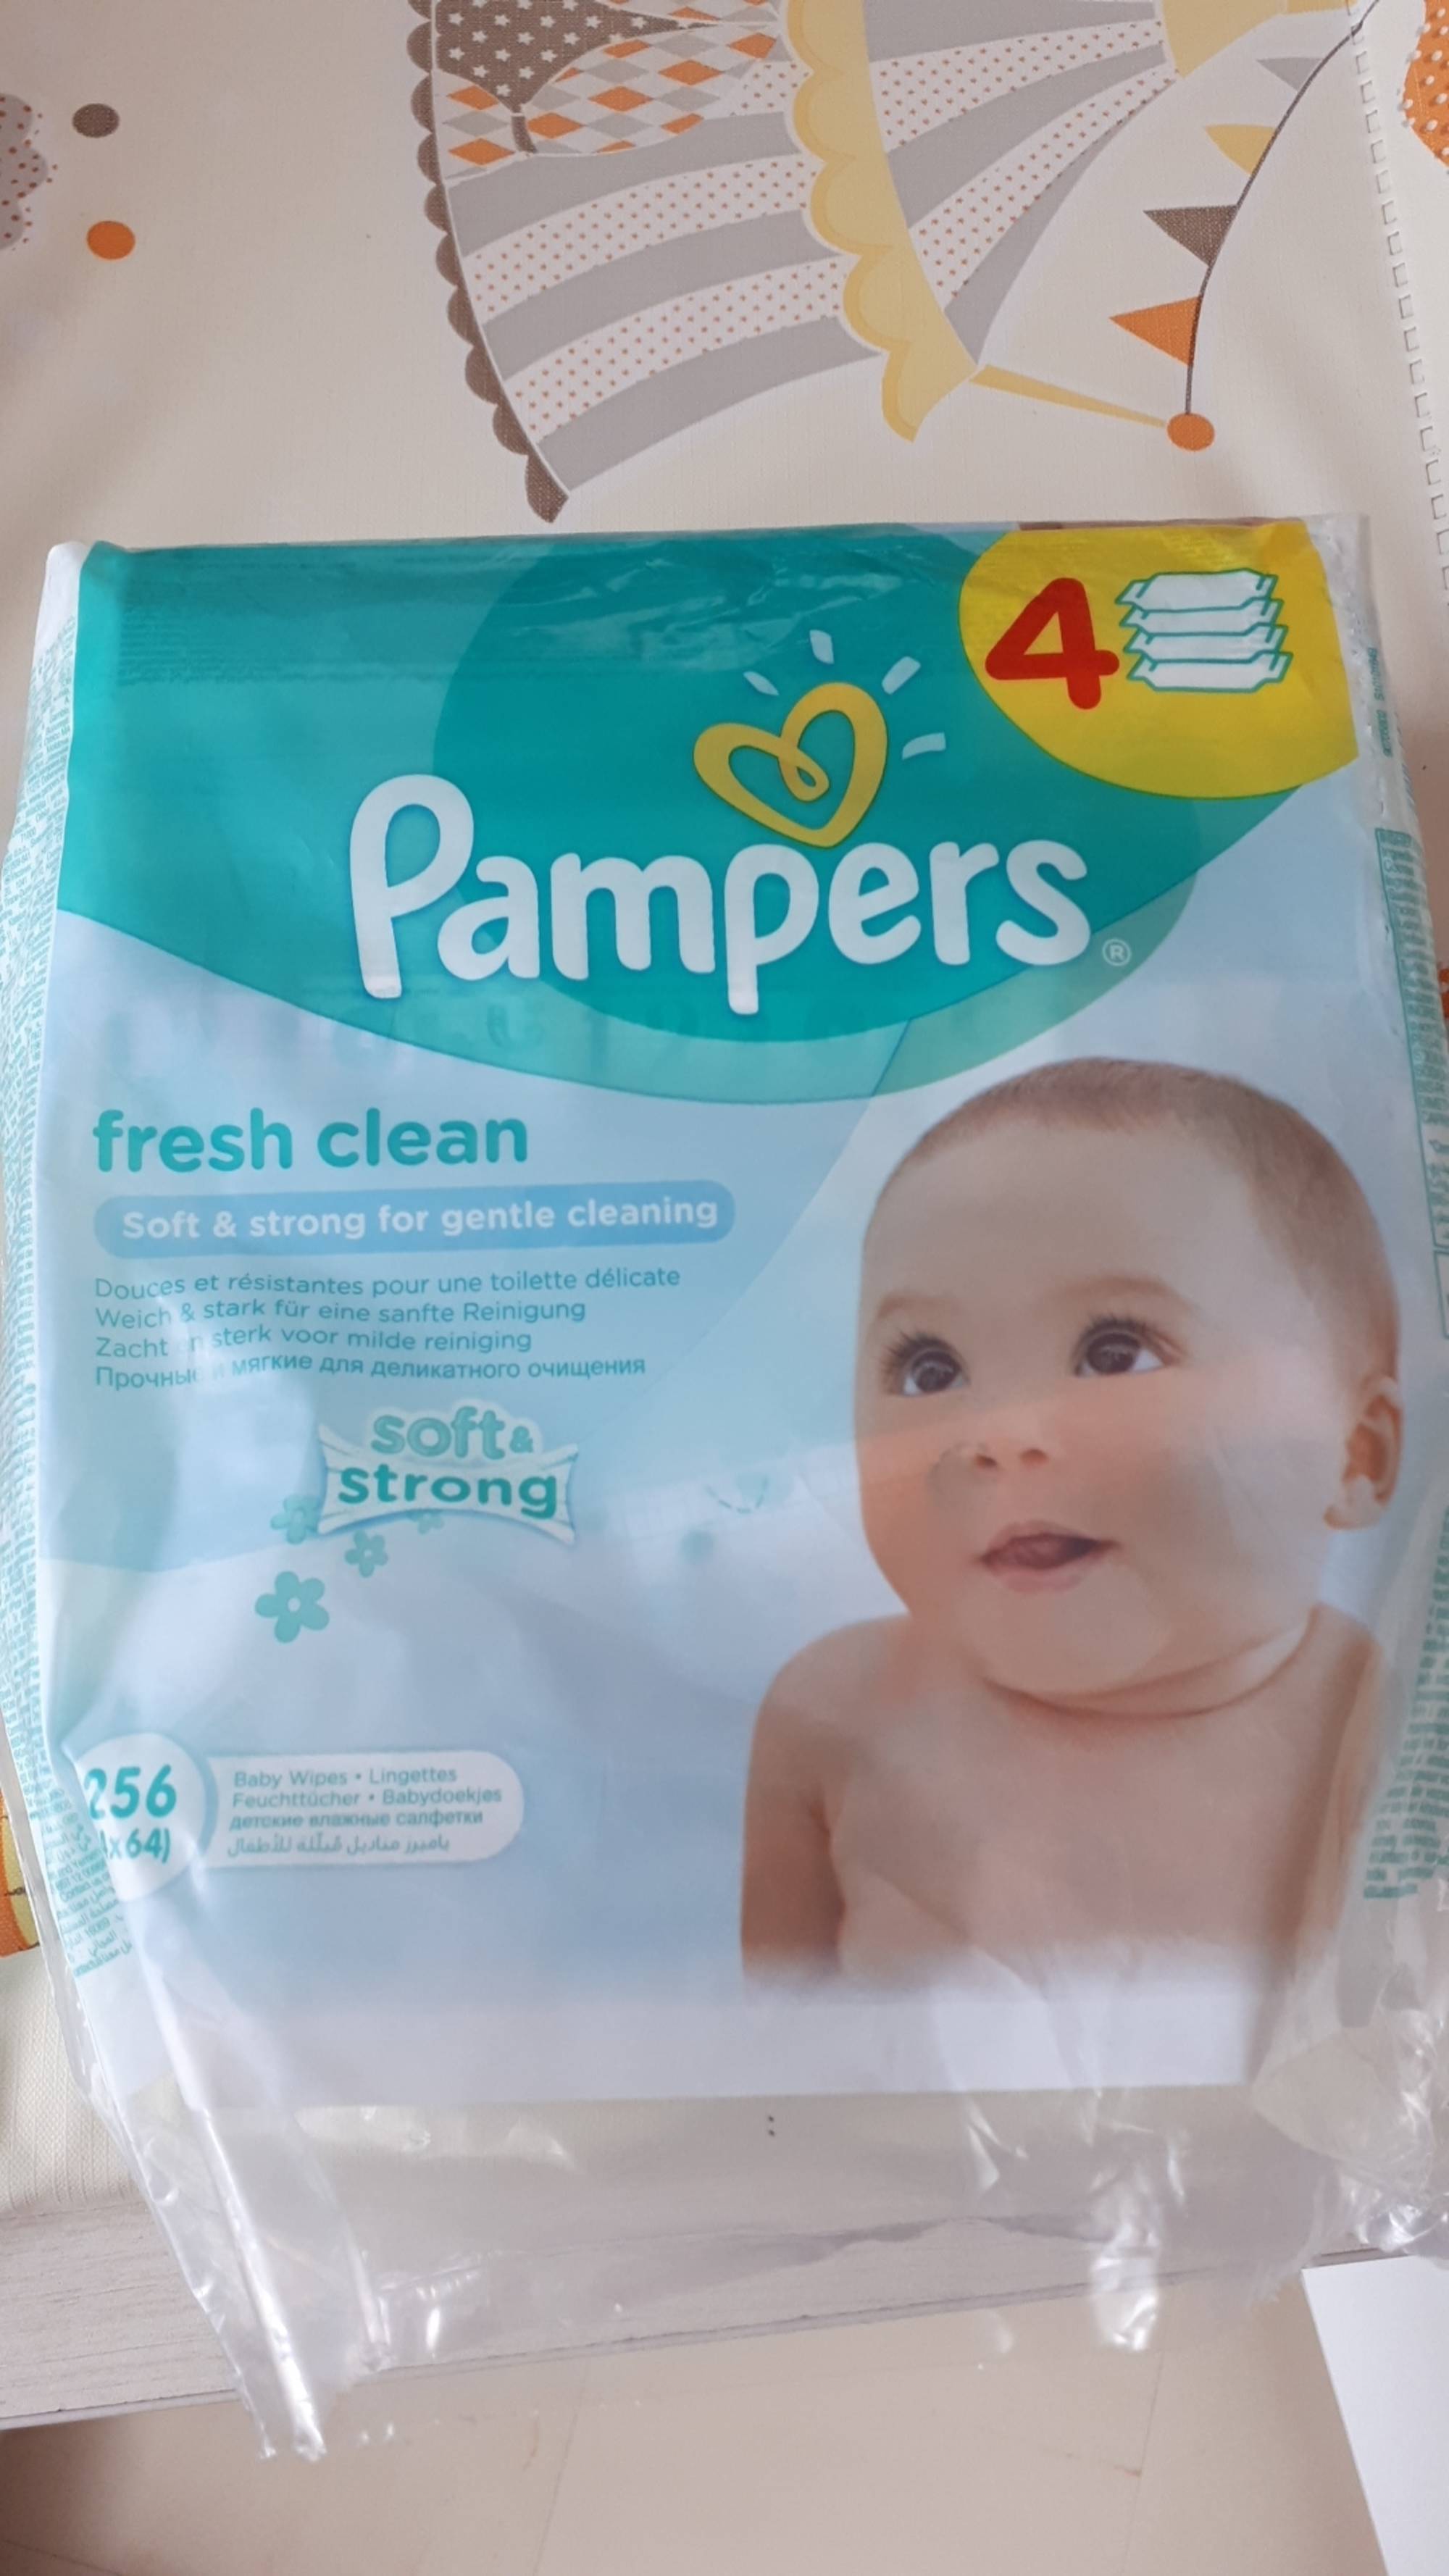 PAMPERS - Fresh clean - Soft & strong for gentle cleaning